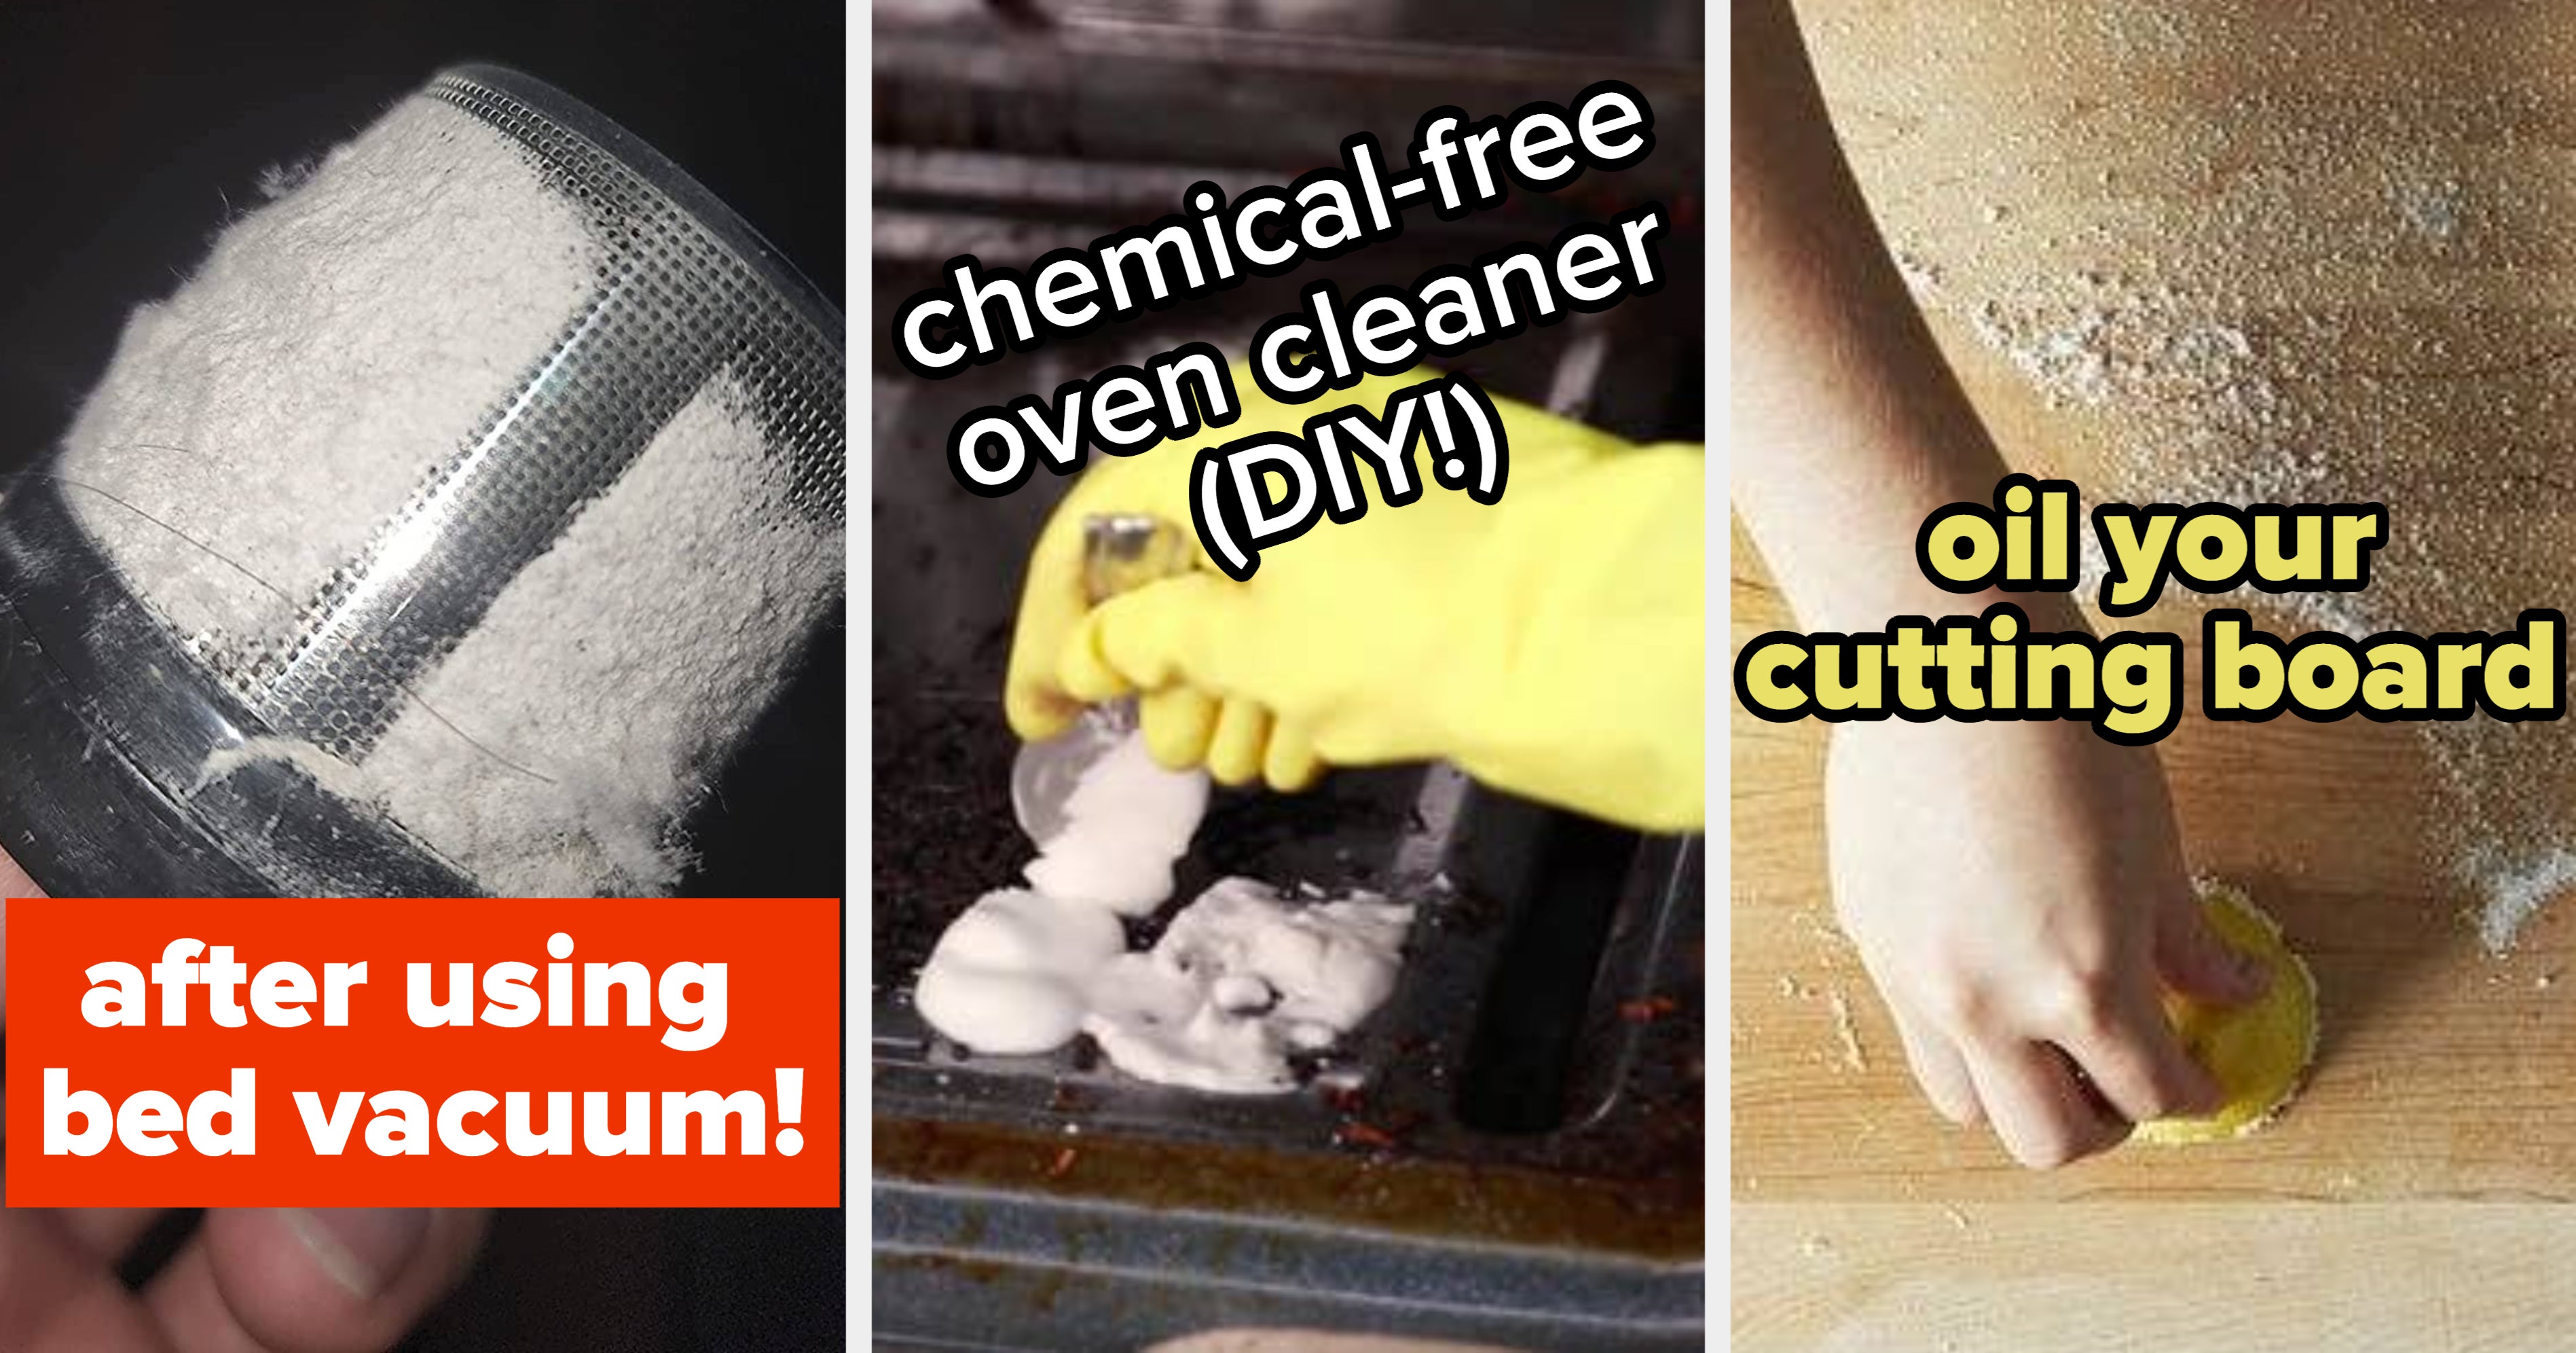 26 Cleaning Tips You'll Wish You'd Learned Years Ago